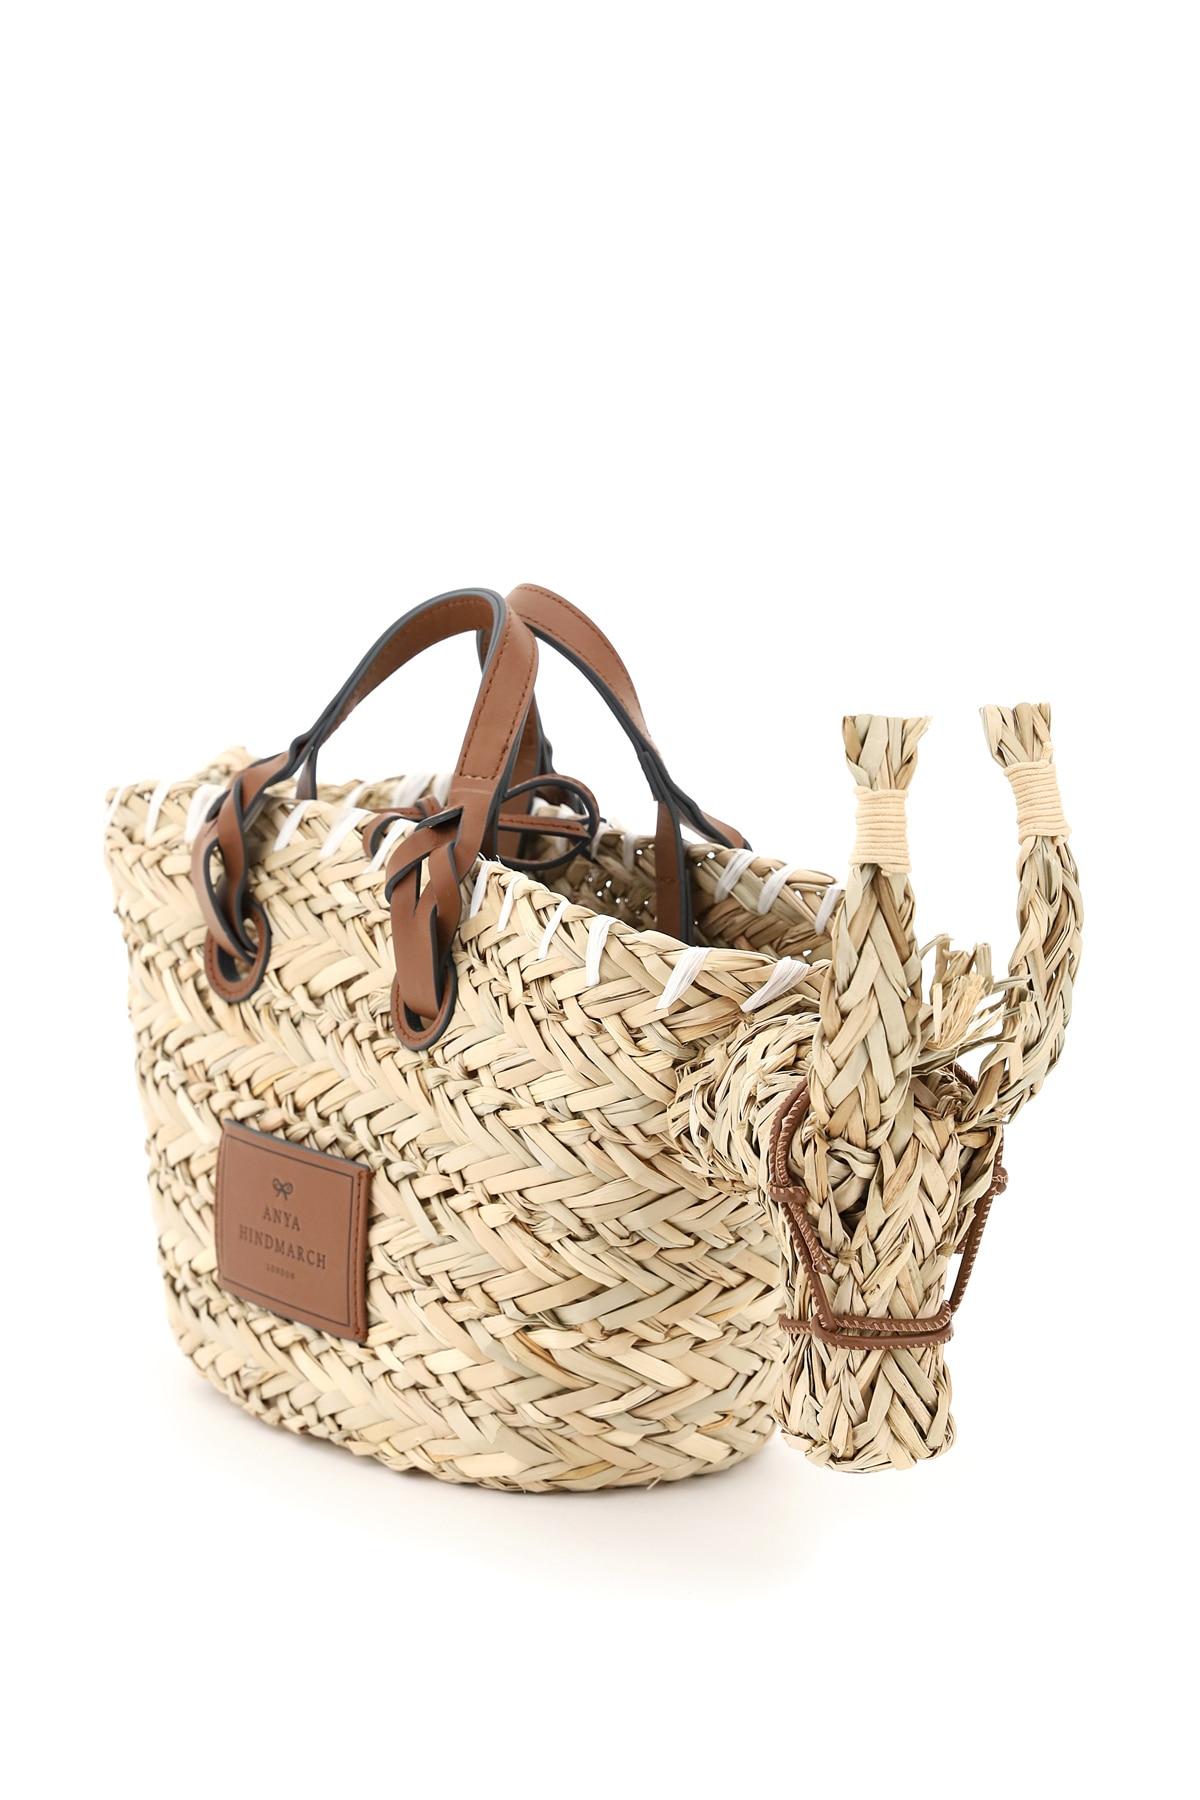 Anya Hindmarch Donkey Small Basket Bag in Beige,Brown (Natural) - Lyst